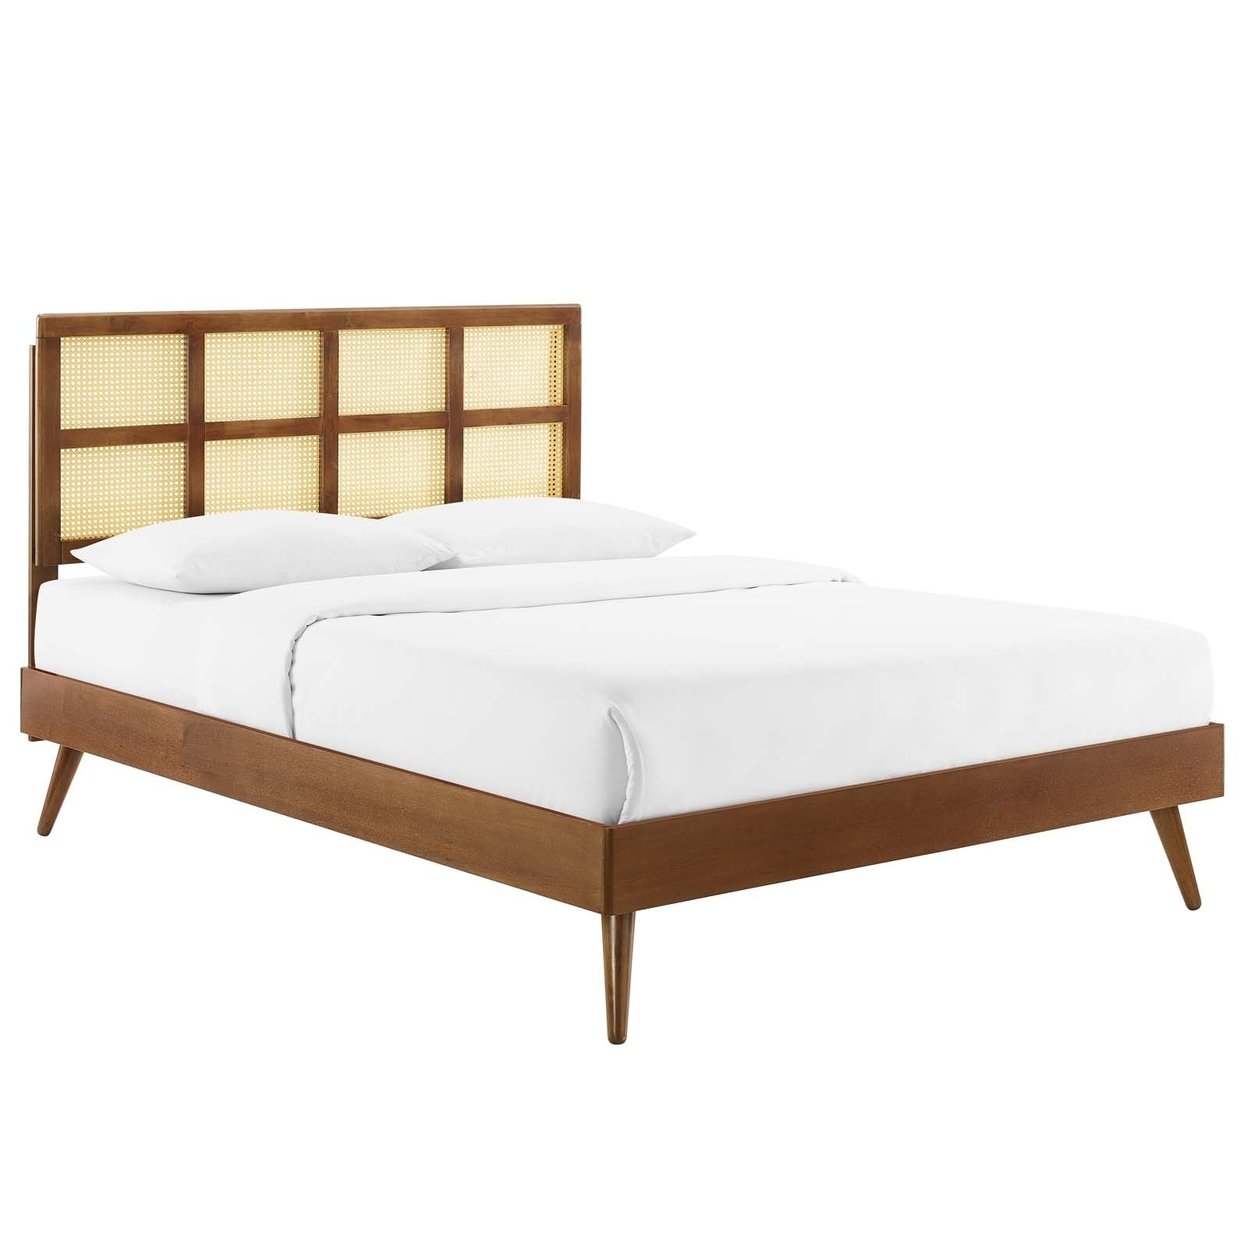 Sidney Cane And Wood Queen Platform Bed With Splayed Legs, Walnut